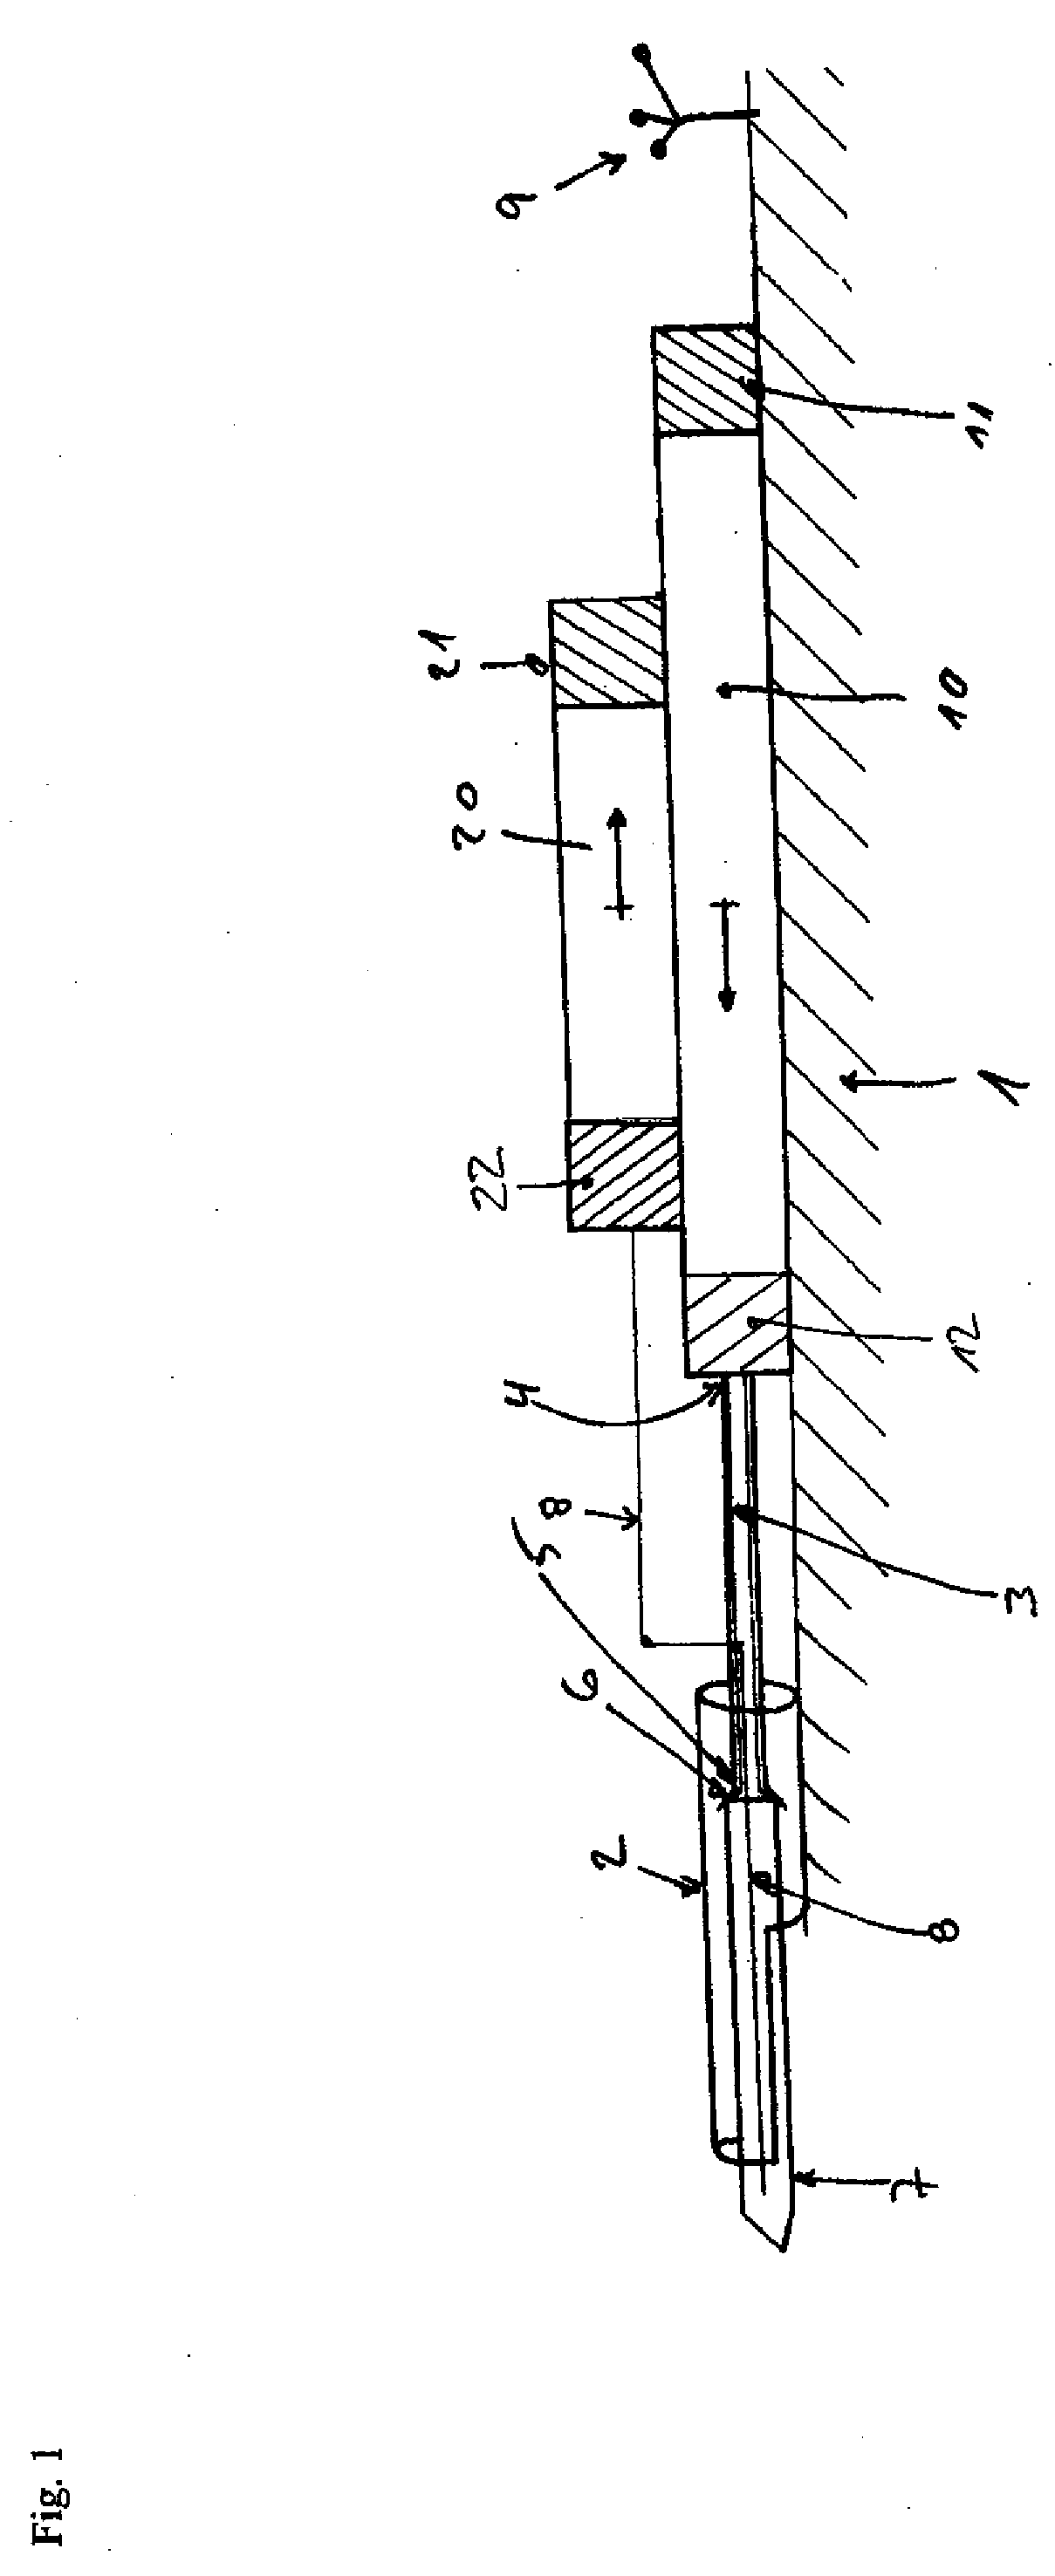 Apparatus and system for insertion of an implant